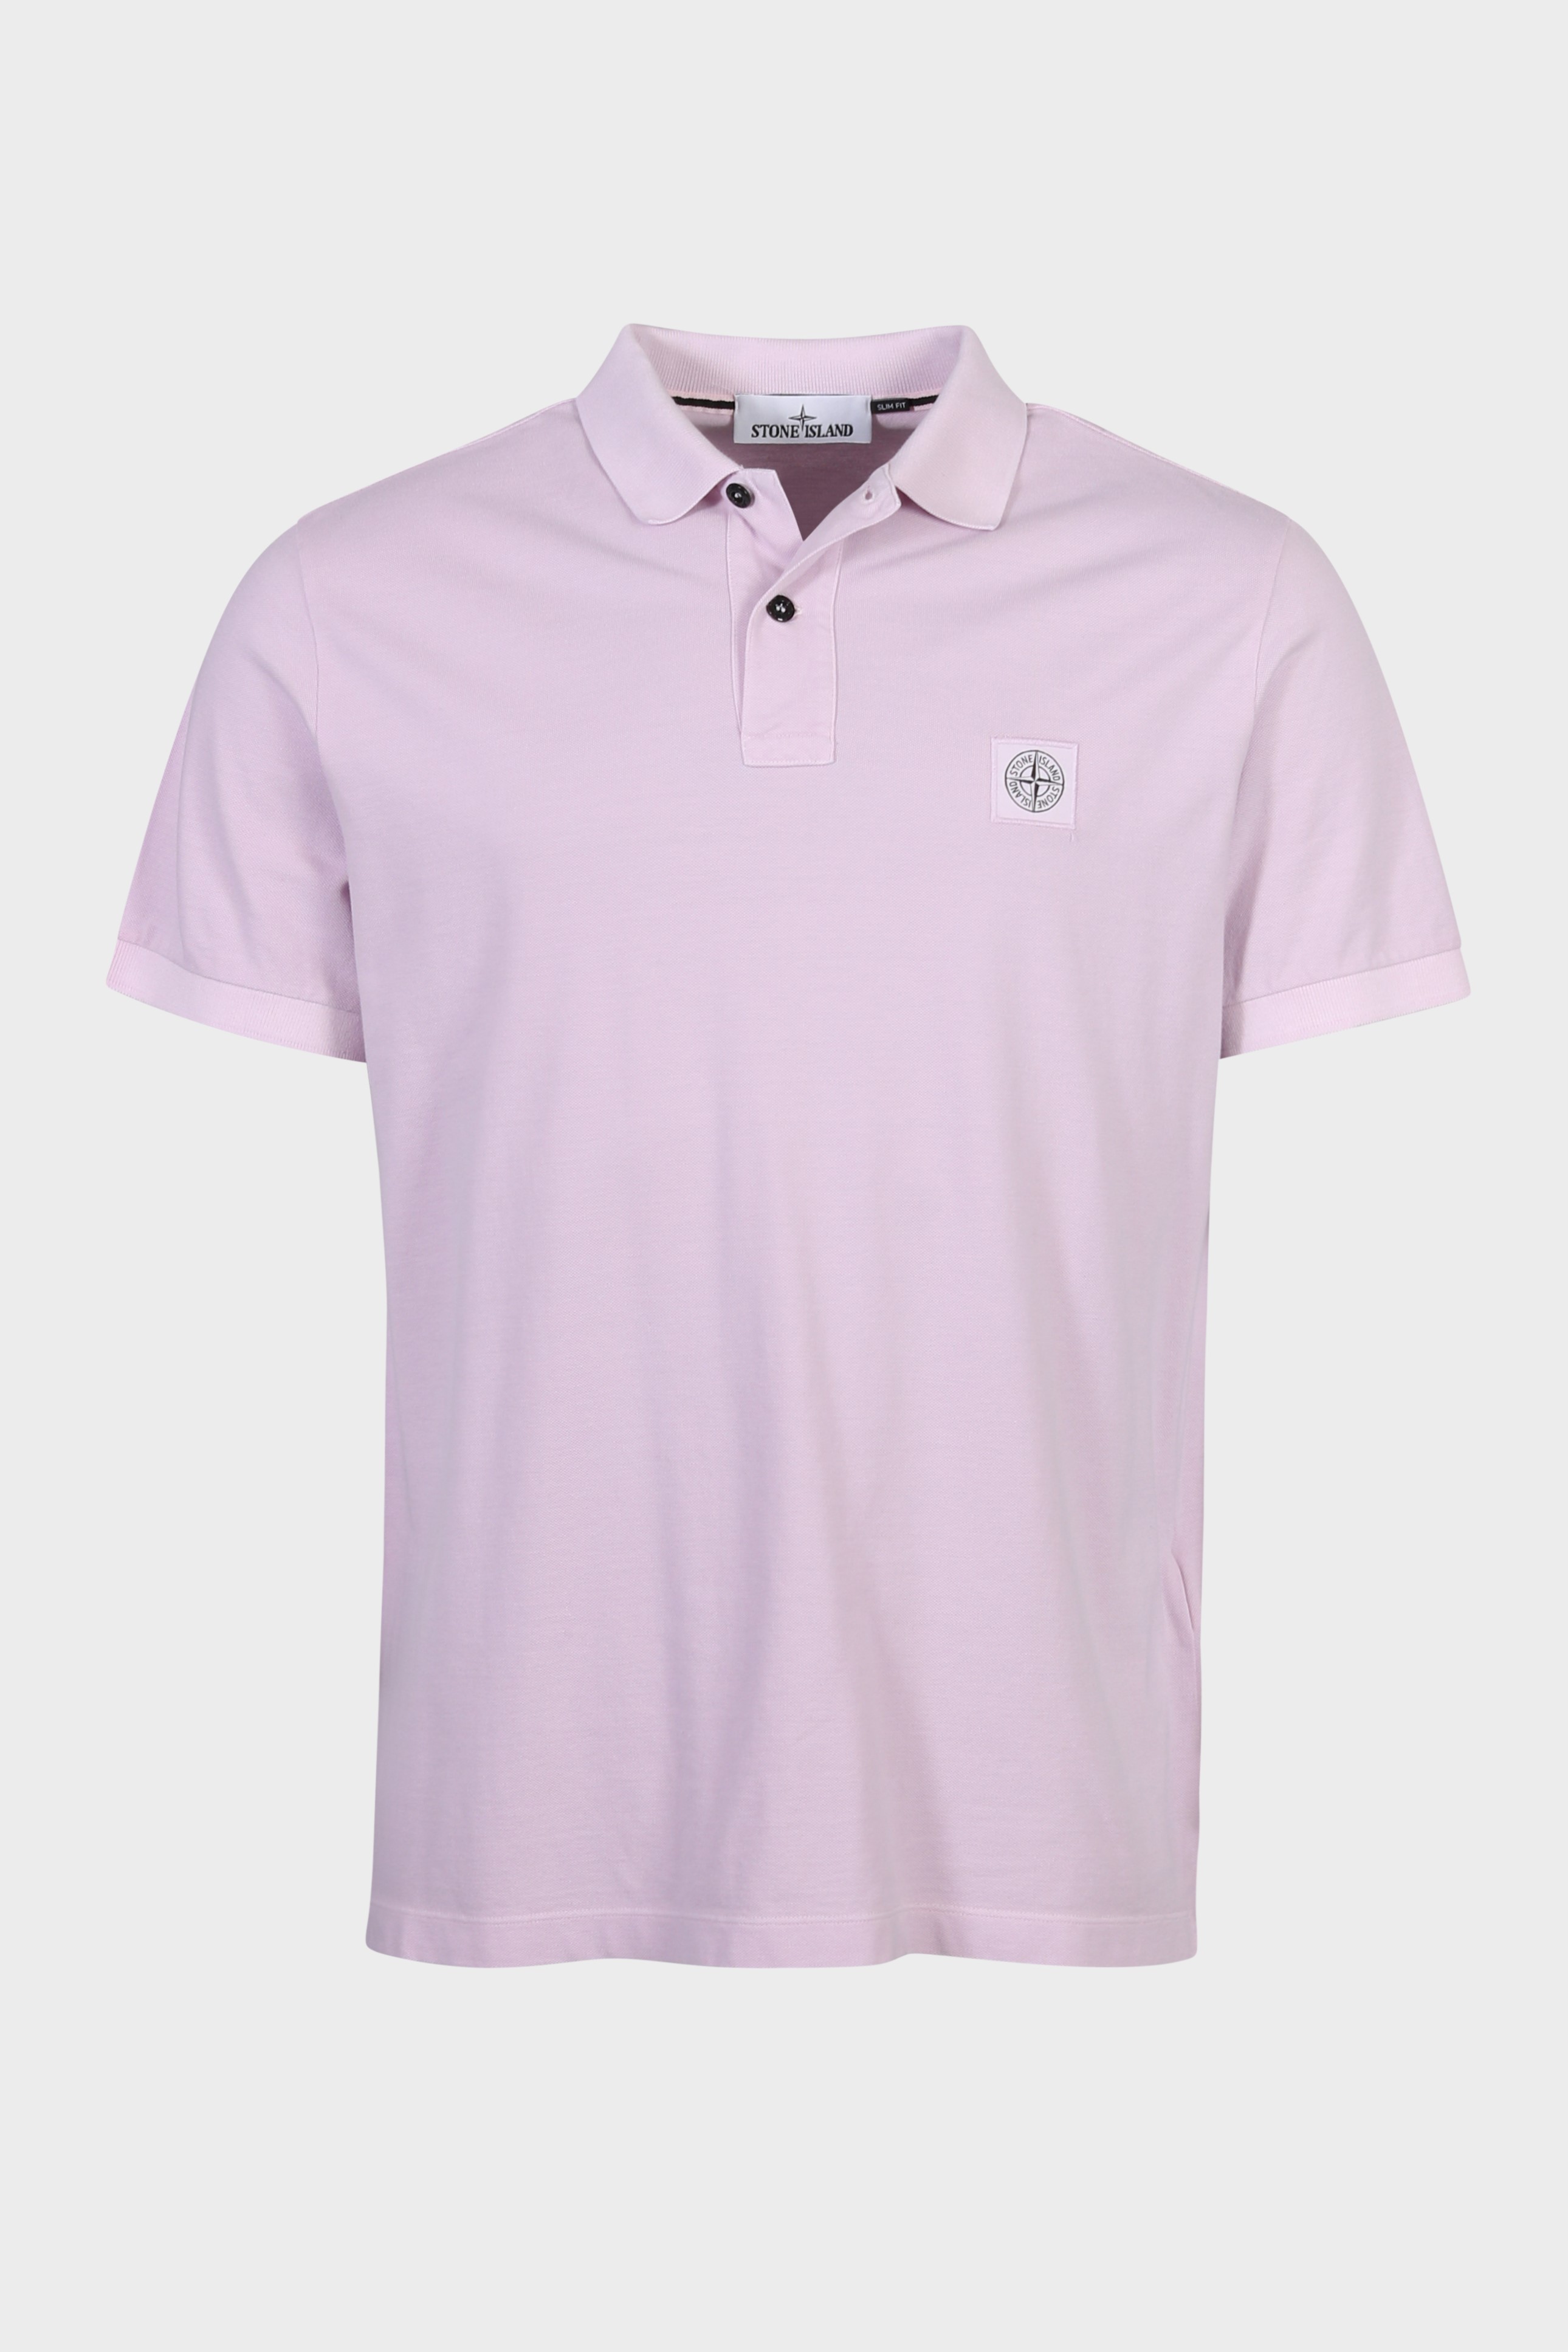 STONE ISLAND Polo Shirt in Light Pink